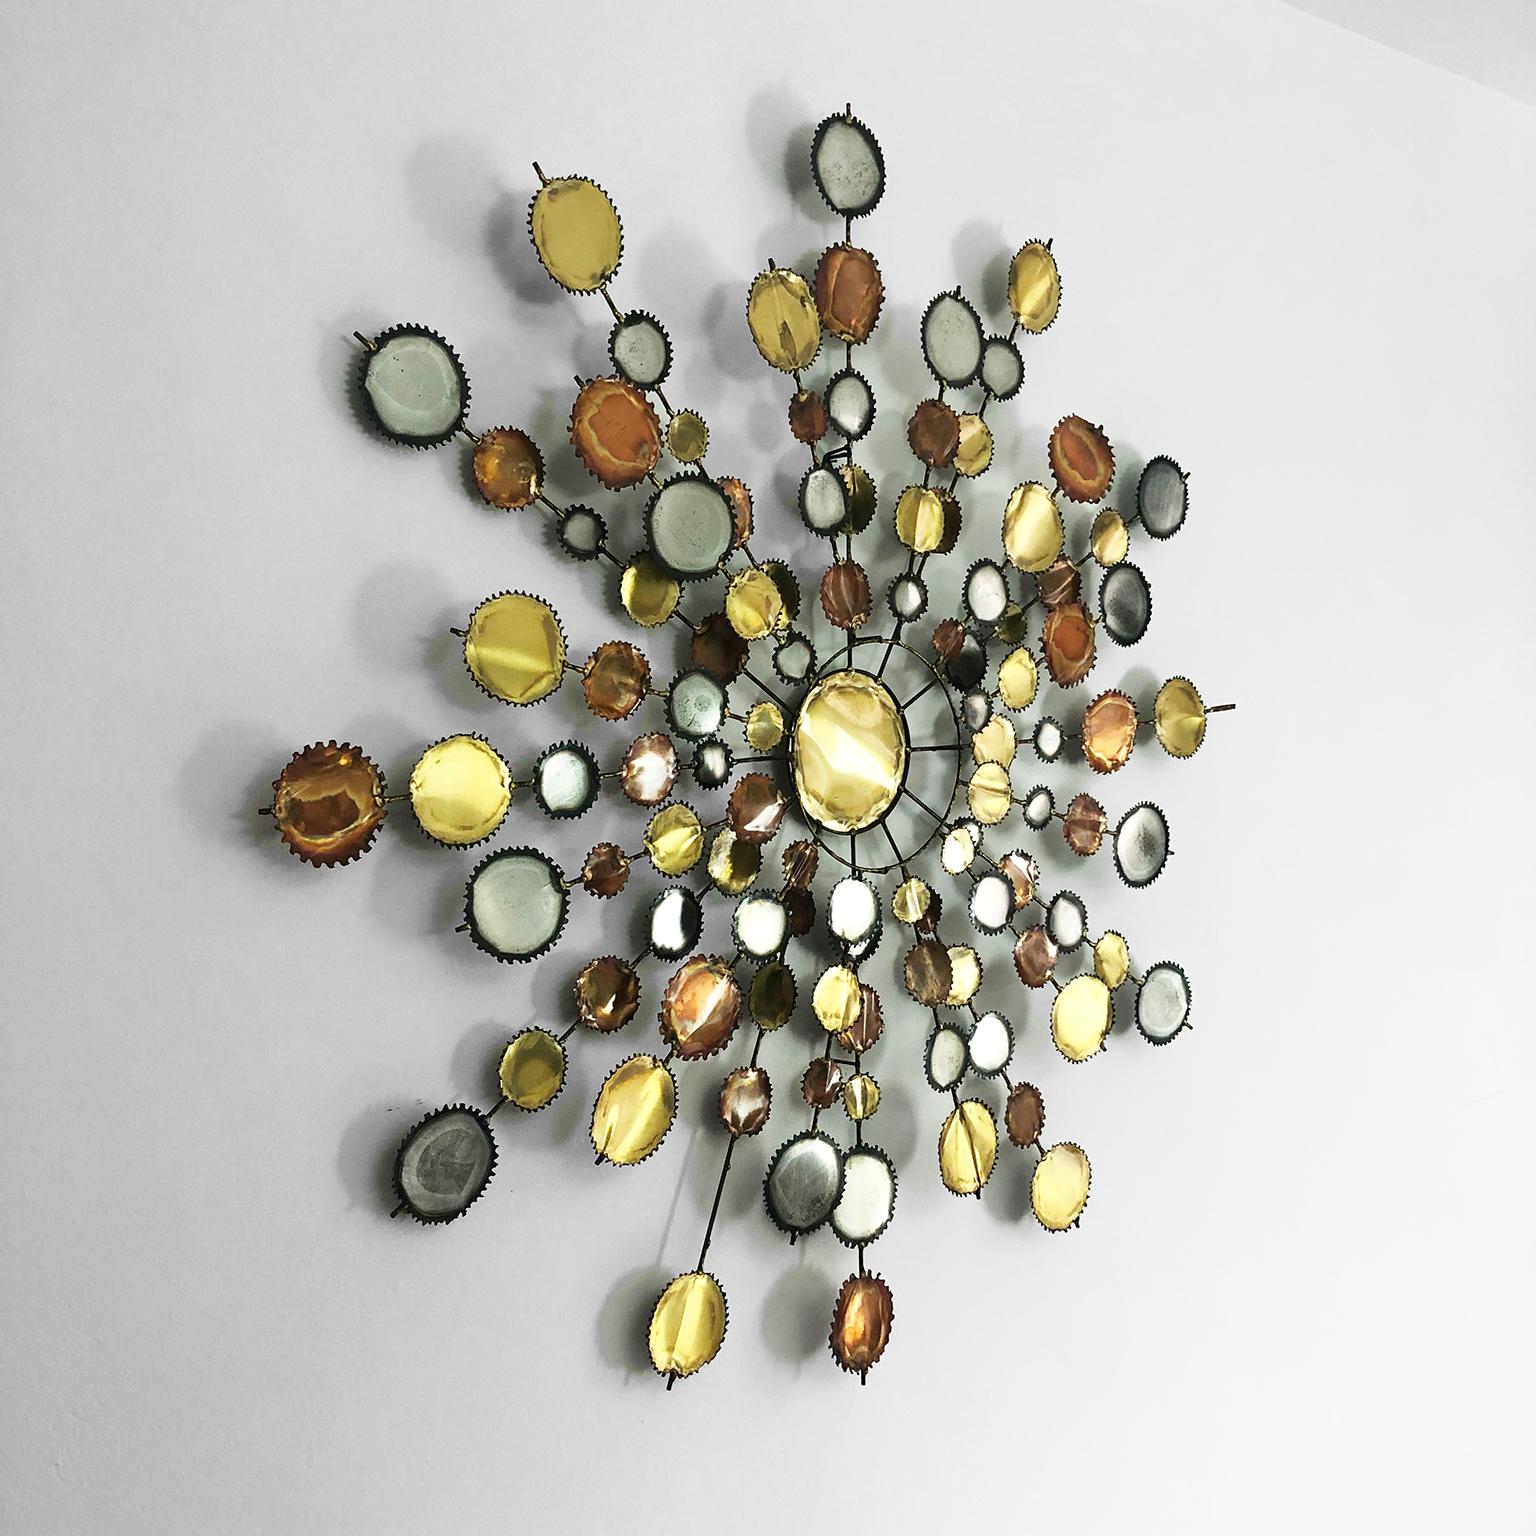 We offer this large diameter wall sculpture in the style of C. Jere, circa 1960.